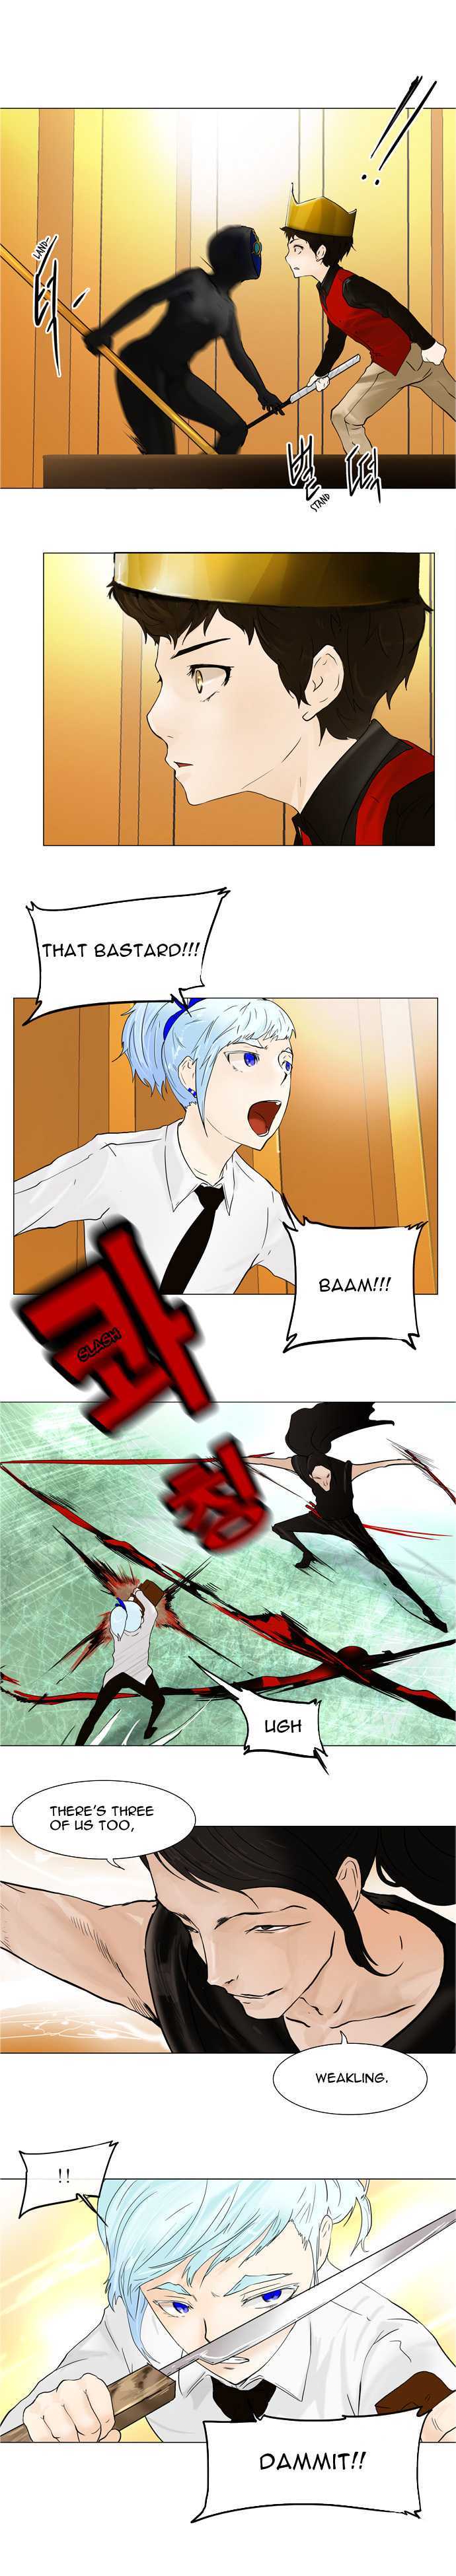 Tower of God 24